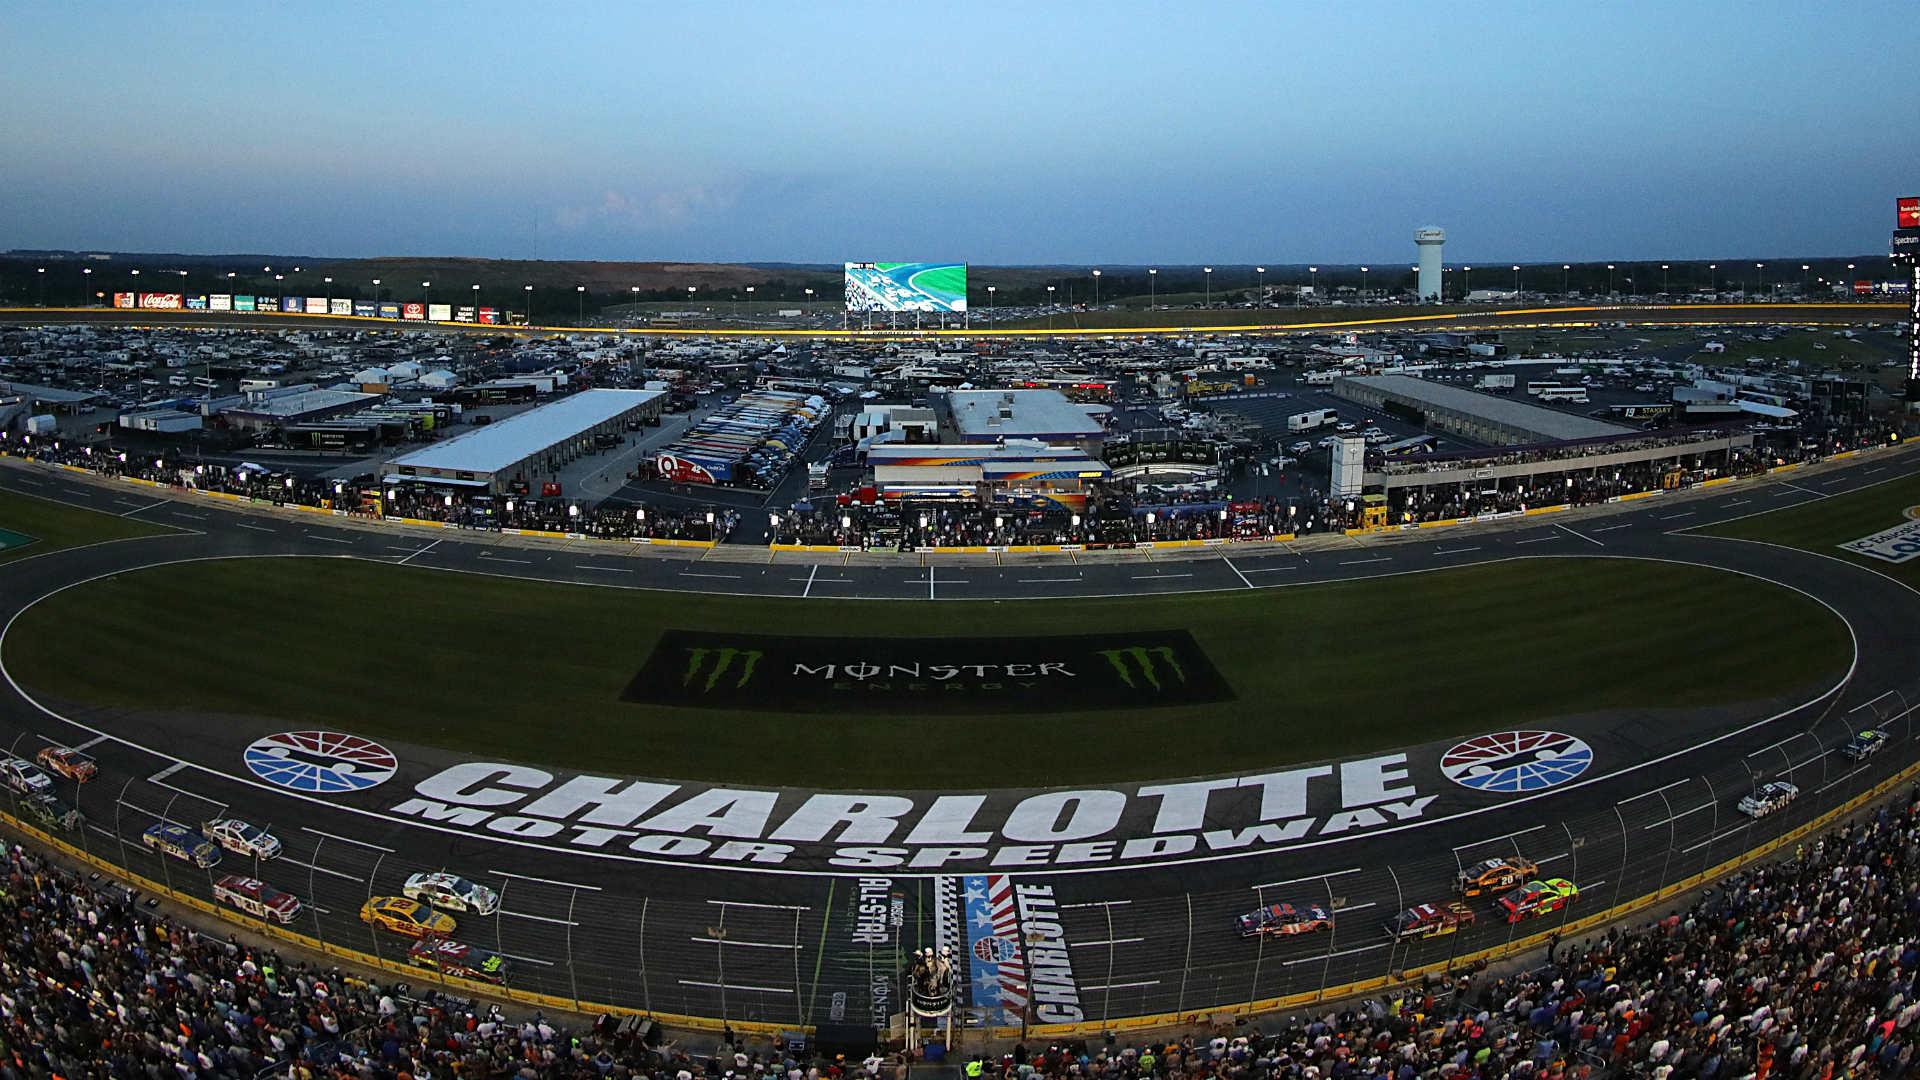 NASCAR All Star Race: Weather Reports Look Promising For Race Start